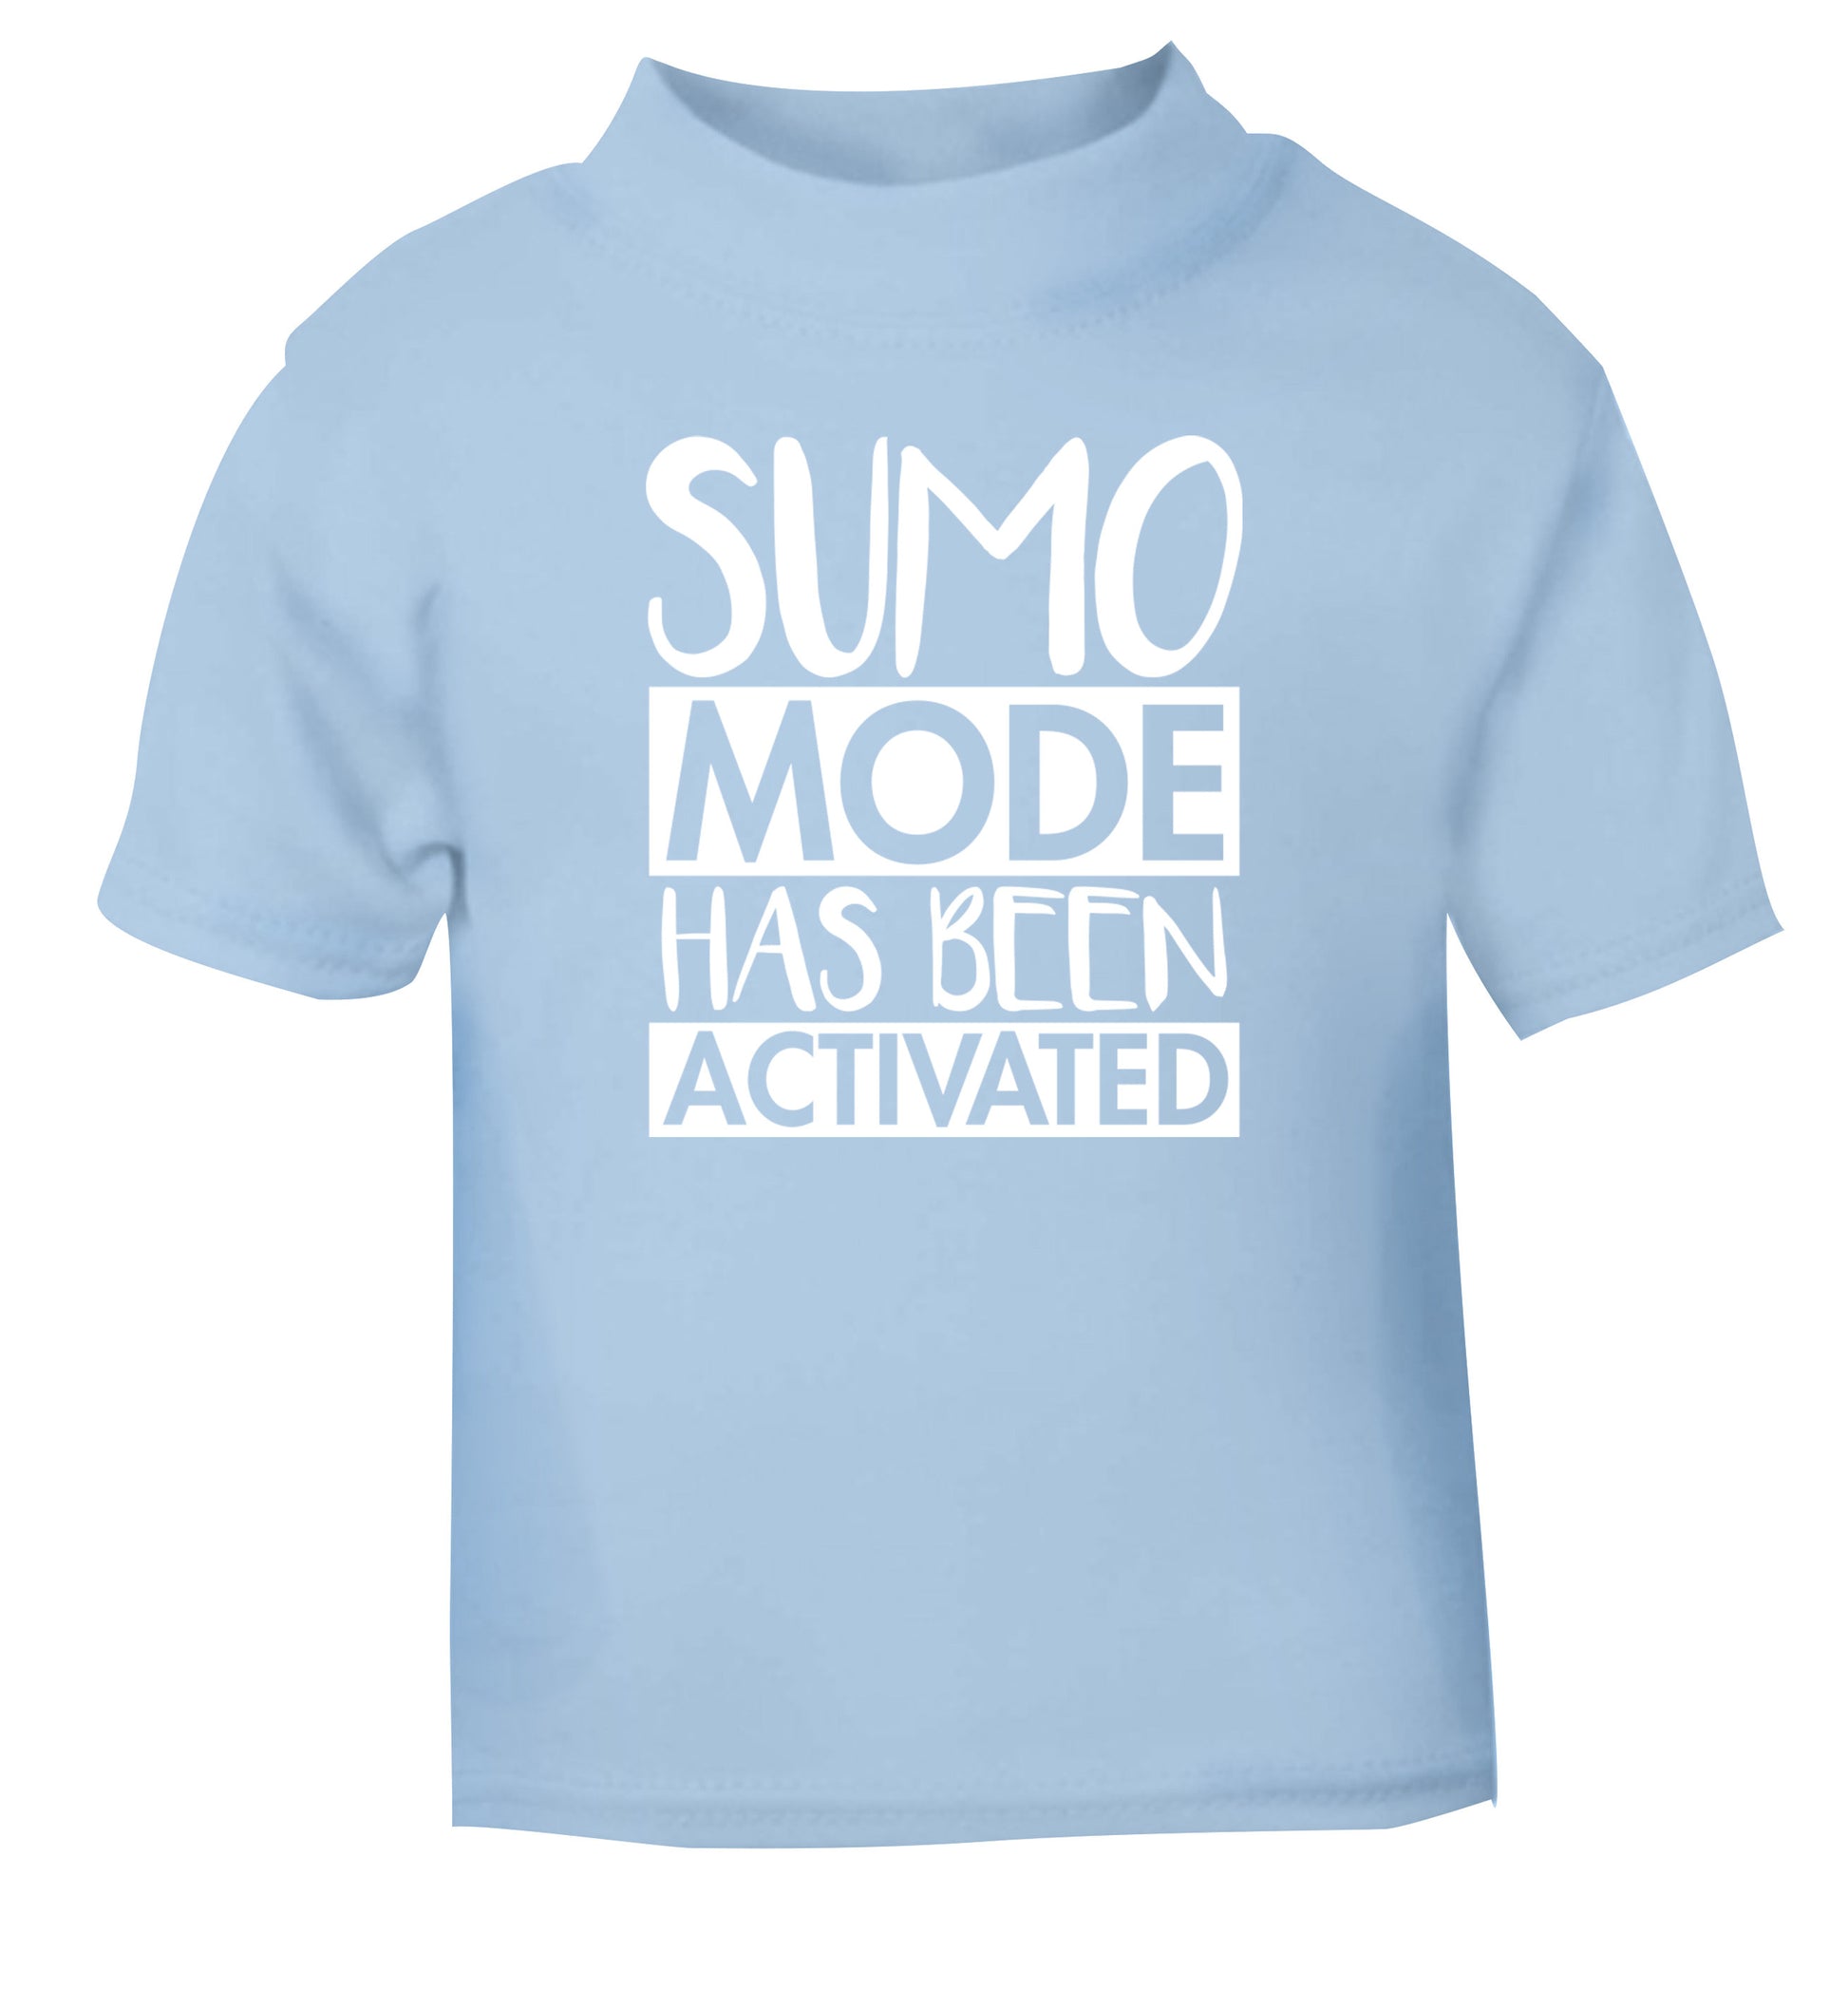 Sumo mode activated light blue Baby Toddler Tshirt 2 Years